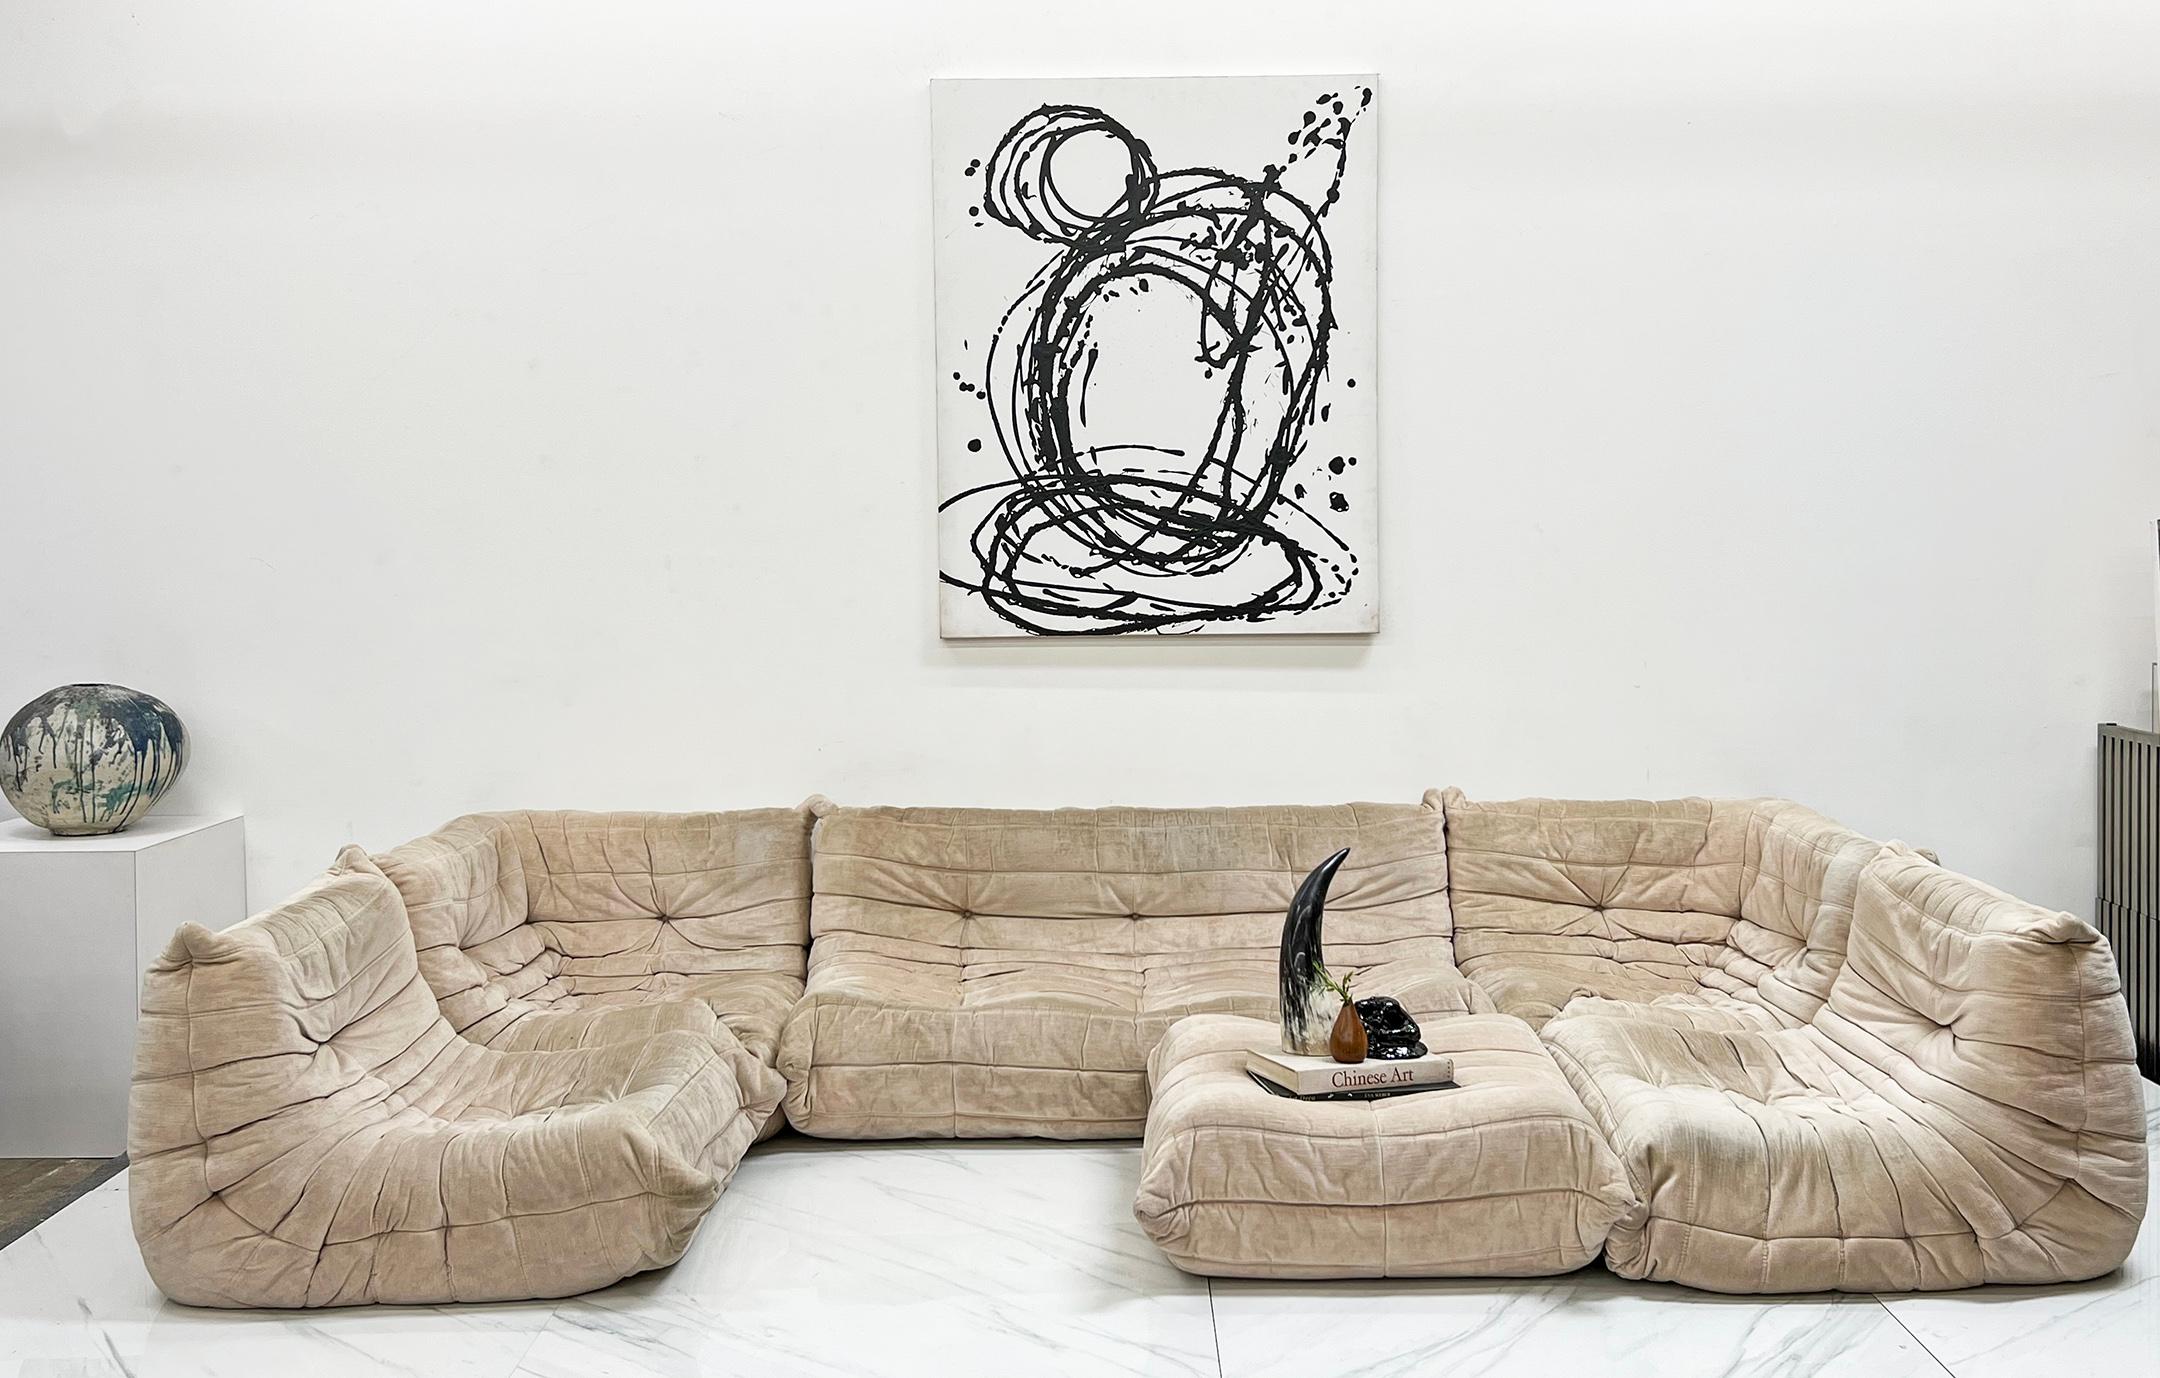 Nobody''s not familiar with this highly coveted, ultra luxe sofa. Deesigned by Michel Ducaroy, the Togo sofa is widely known for being one of the comfiest sofas available in the world, and tops just about every designer's list of must have sofas.